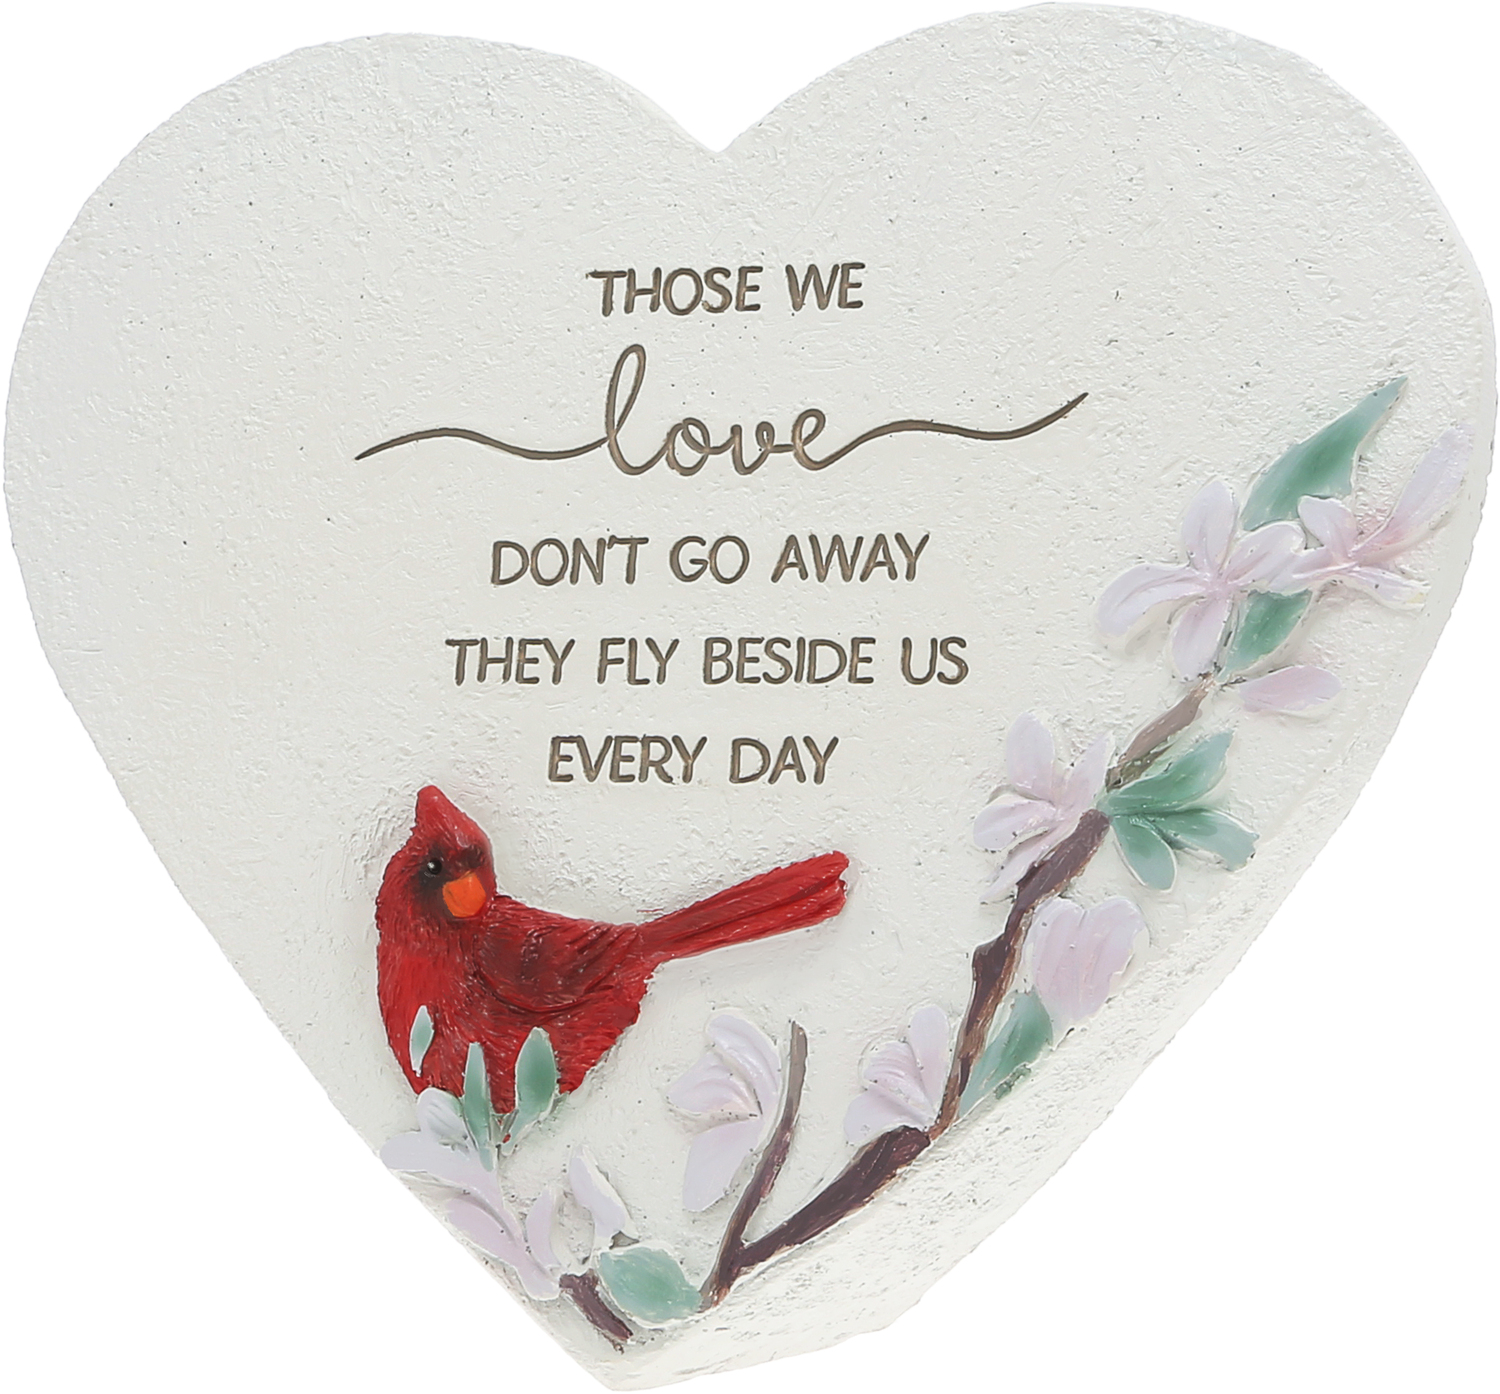 Those We Love by Always by Your Side - Those We Love - 5" Standing Heart Memorial Stone